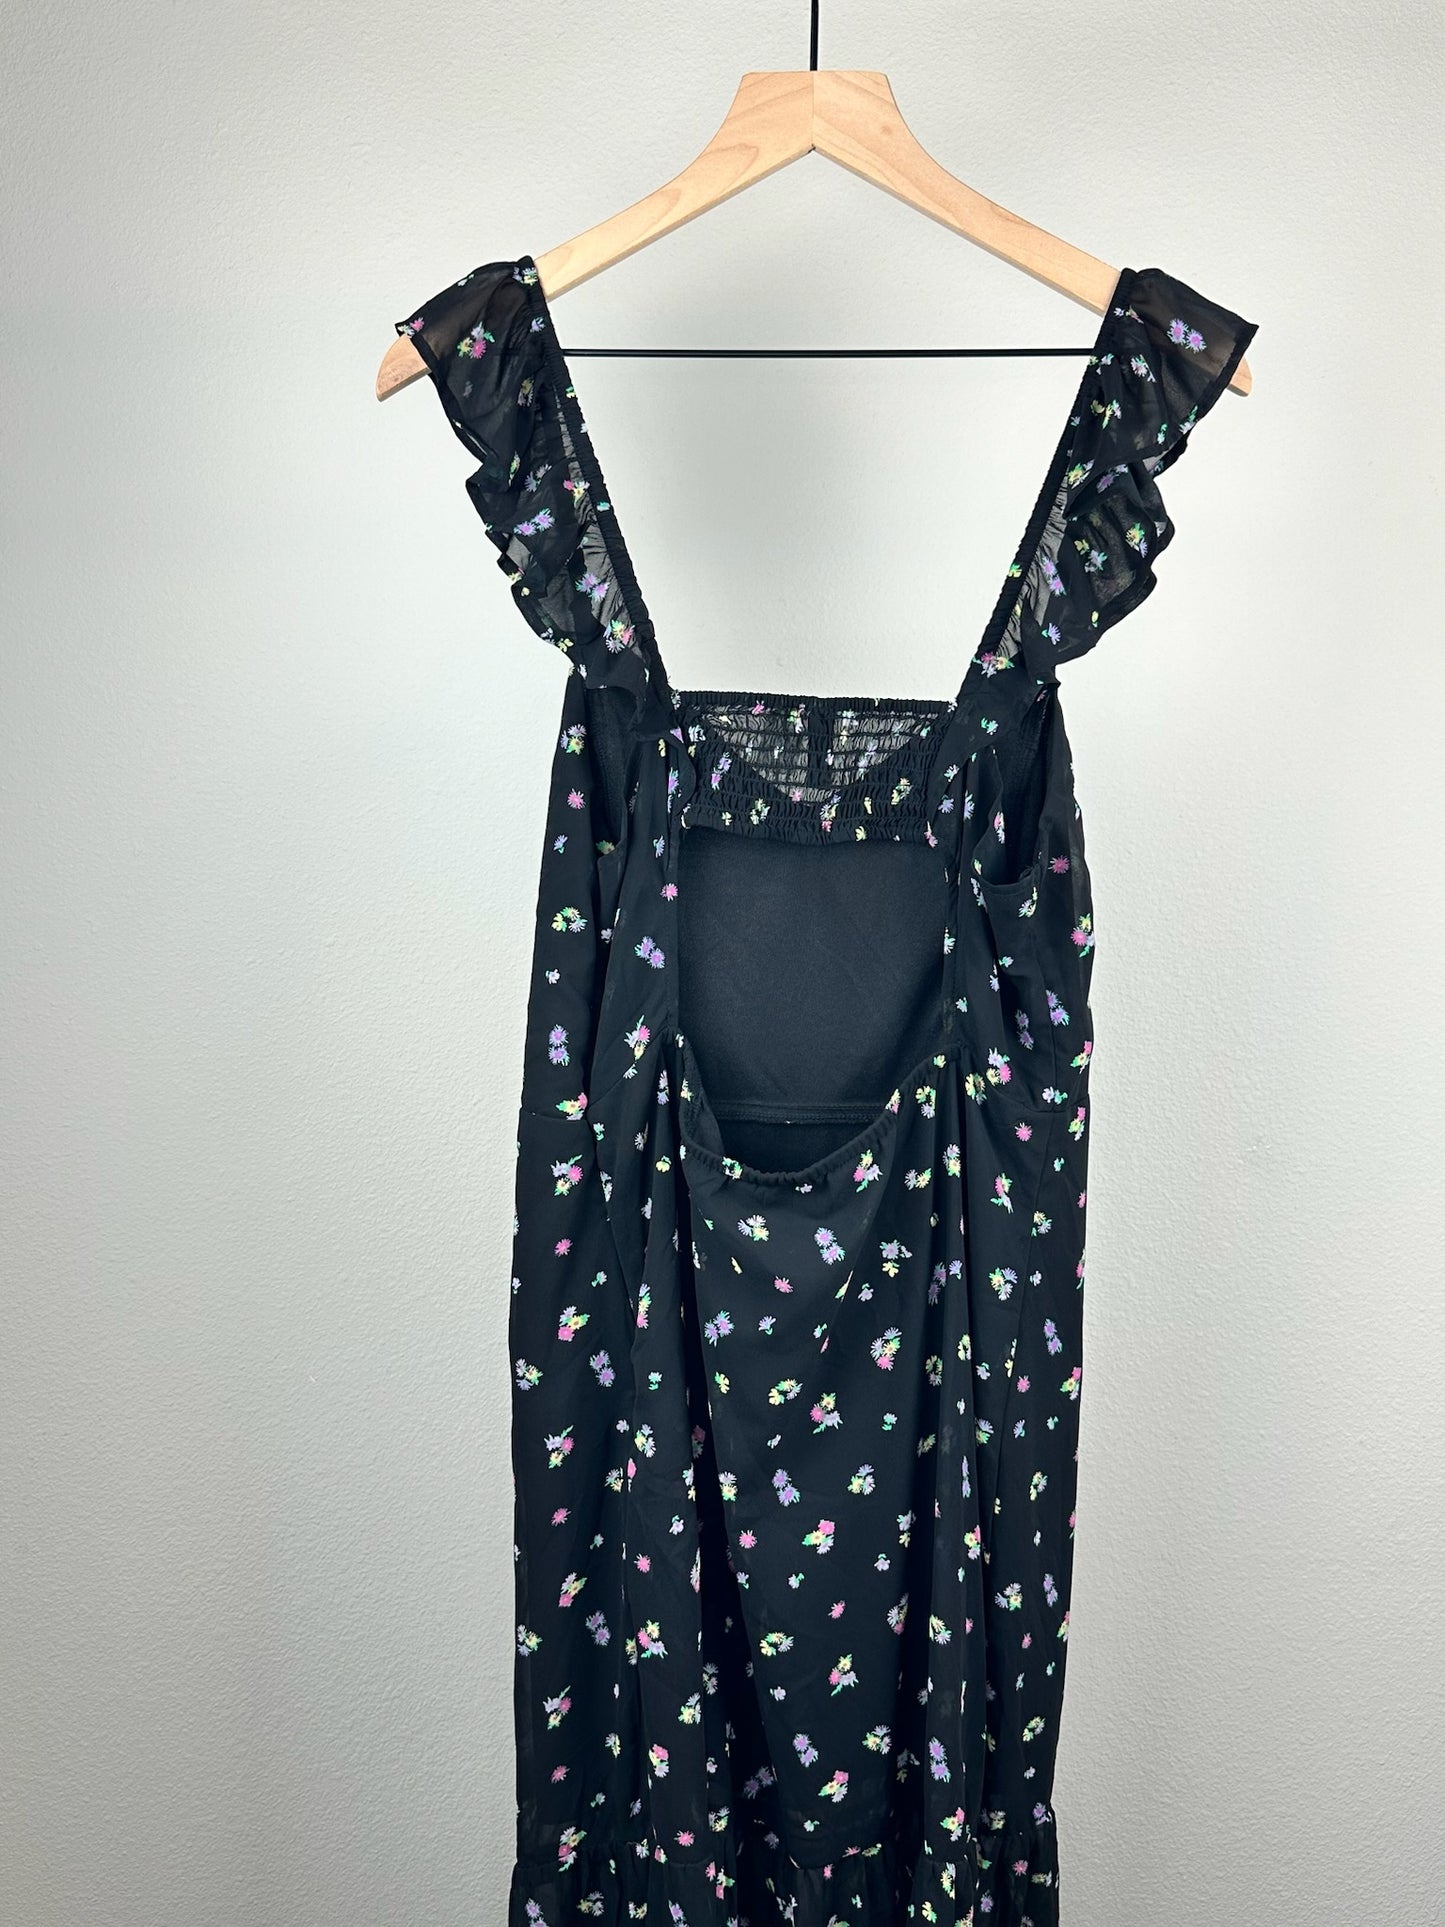 Black Floral Dress with Open Back by H&M/Divided